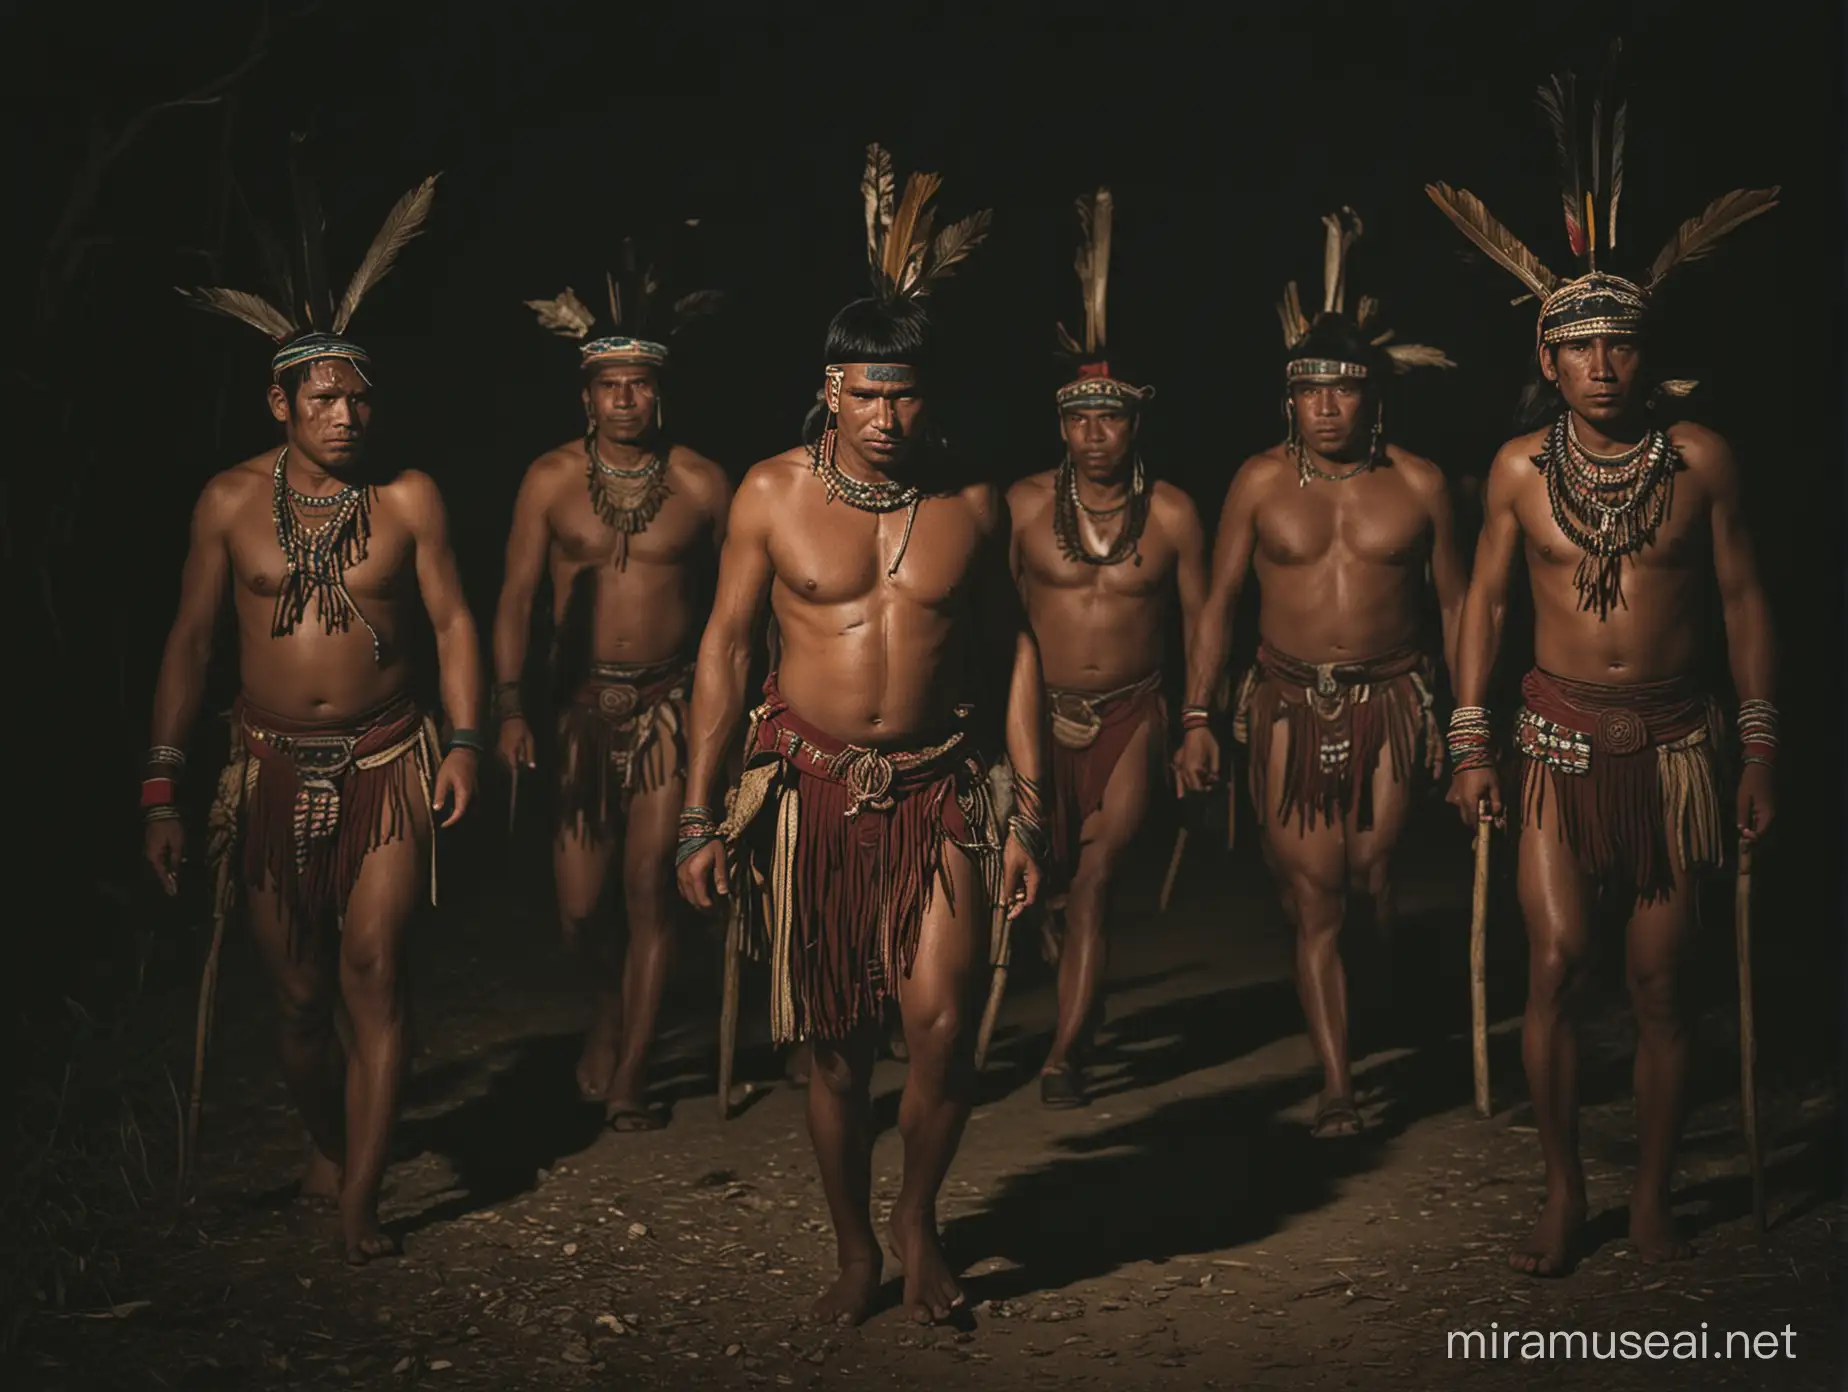 Maya Man Carried by Others in Dark Night